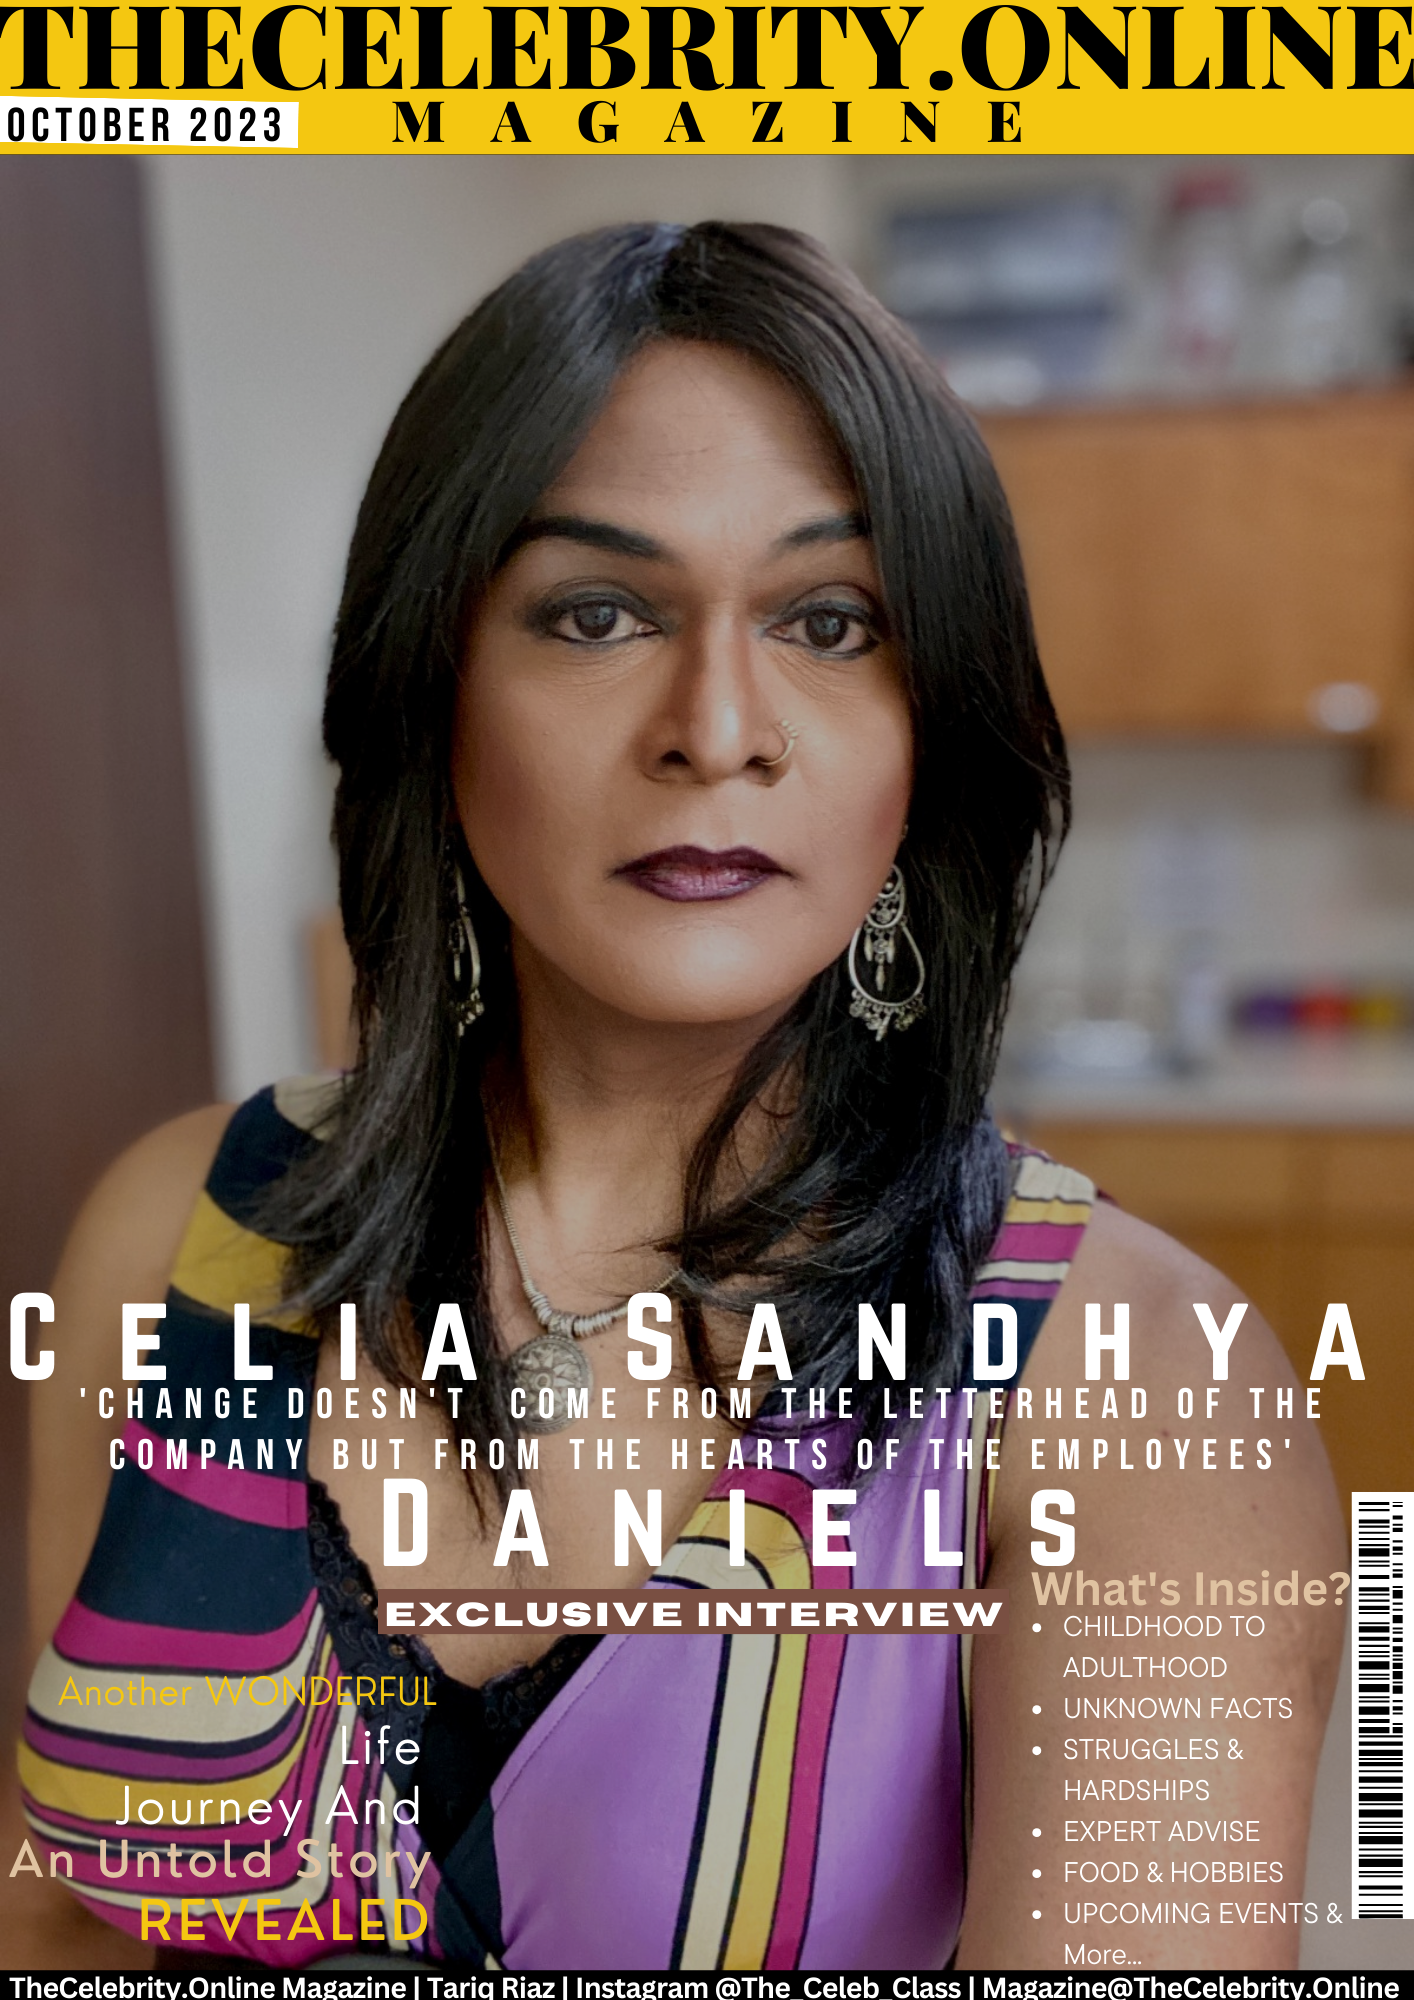 Celia Sandhya Daniels Exclusive Interview – ‘Change Doesn’t  Come From The Letterhead Of The Company But From The Hearts Of The Employees’